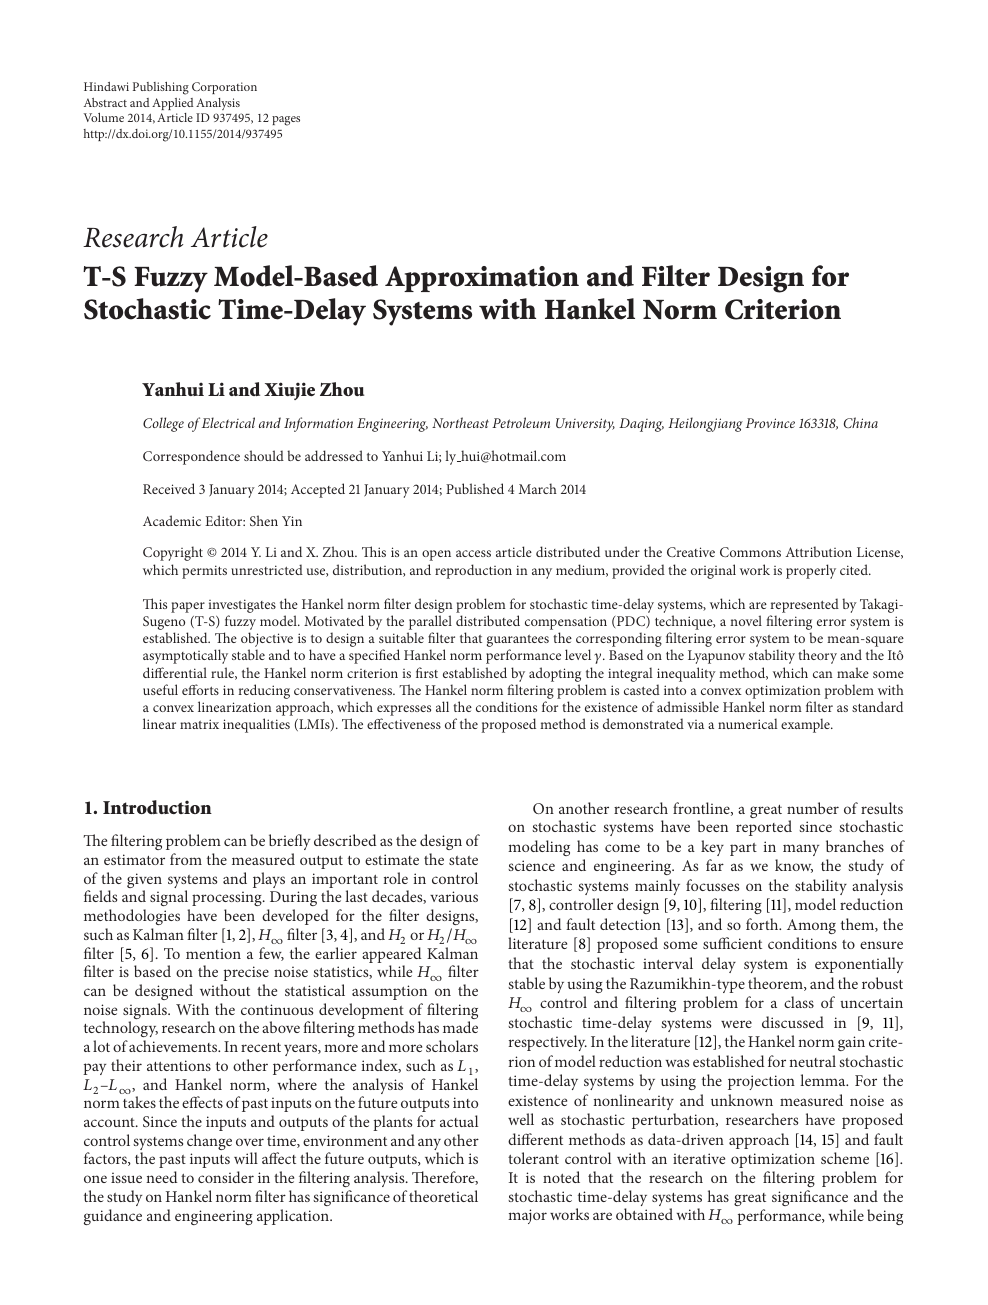 T S Fuzzy Model Based Approximation And Filter Design For Stochastic Time Delay Systems With Hankel Norm Criterion Topic Of Research Paper In Mathematics Download Scholarly Article Pdf And Read For Free On Cyberleninka